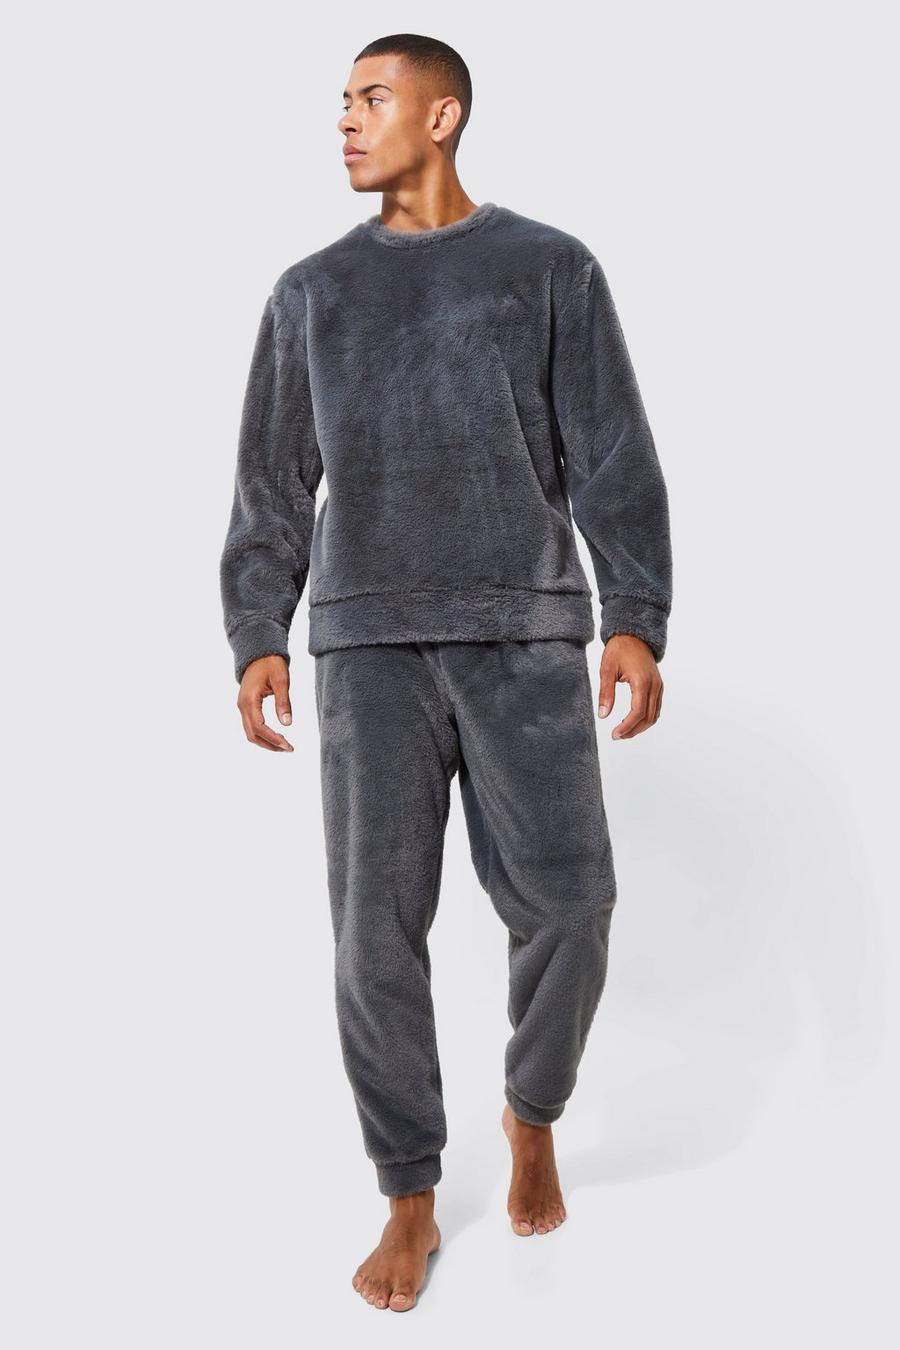 Charcoal gris Faux Fur Oversized Sweater and Cuffed Jogger Lounge Set